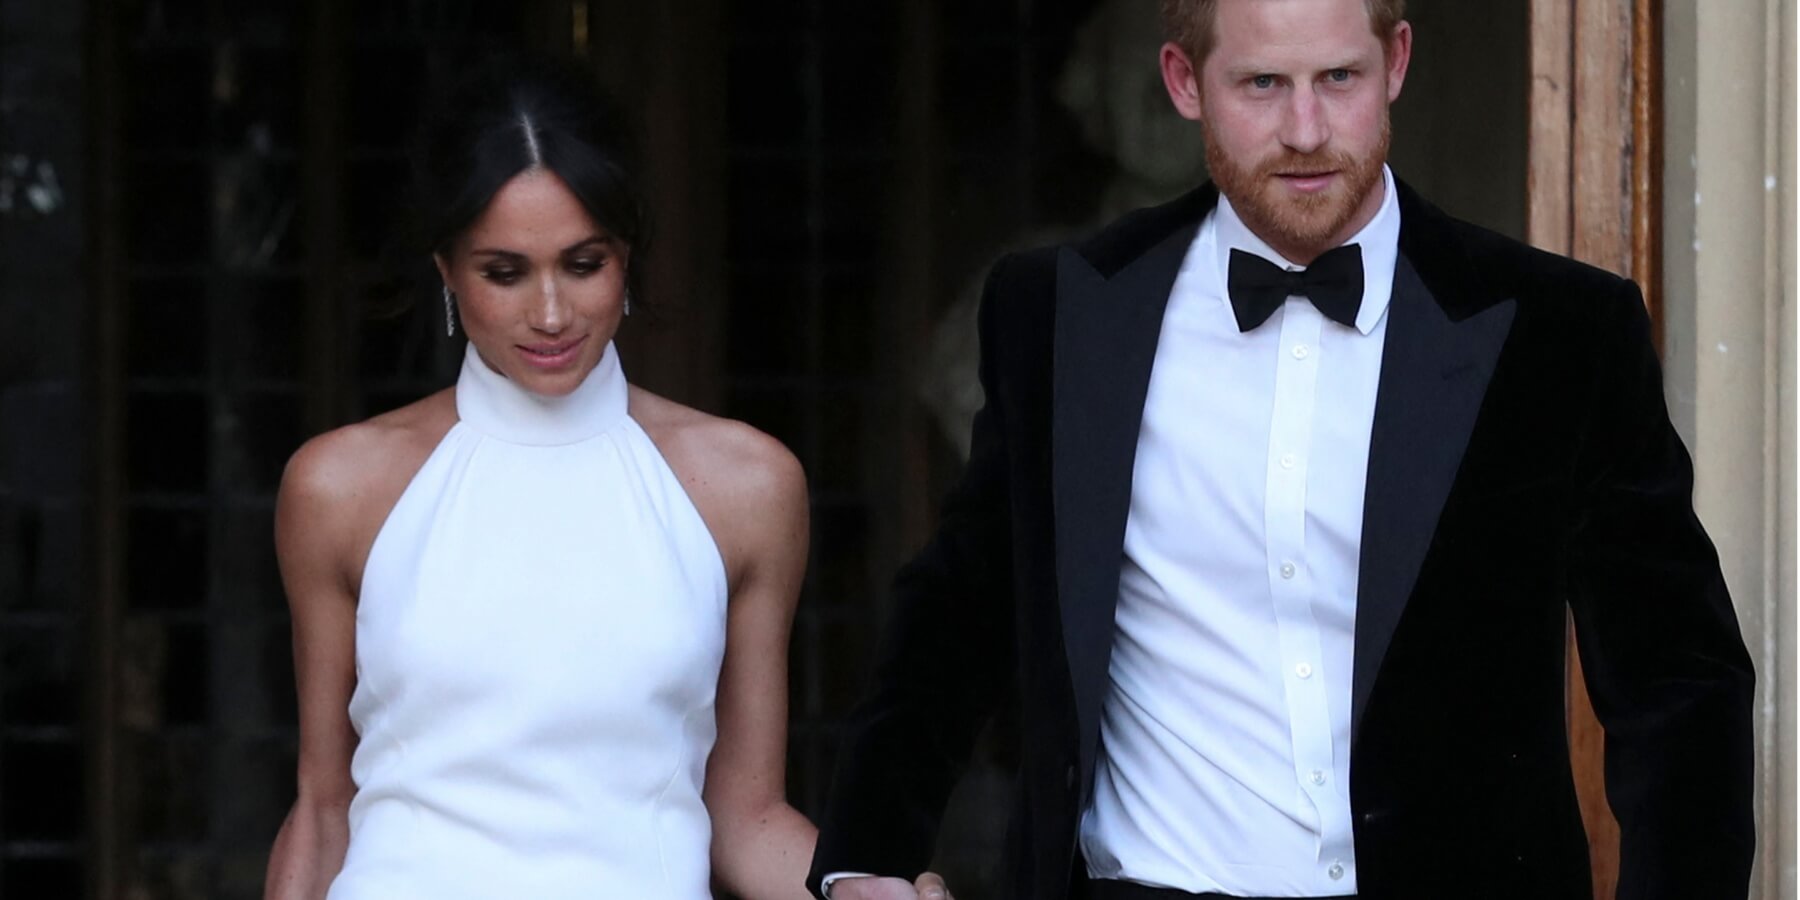 Meghan Markle and Prince Harry head to their wedding reception in 2018